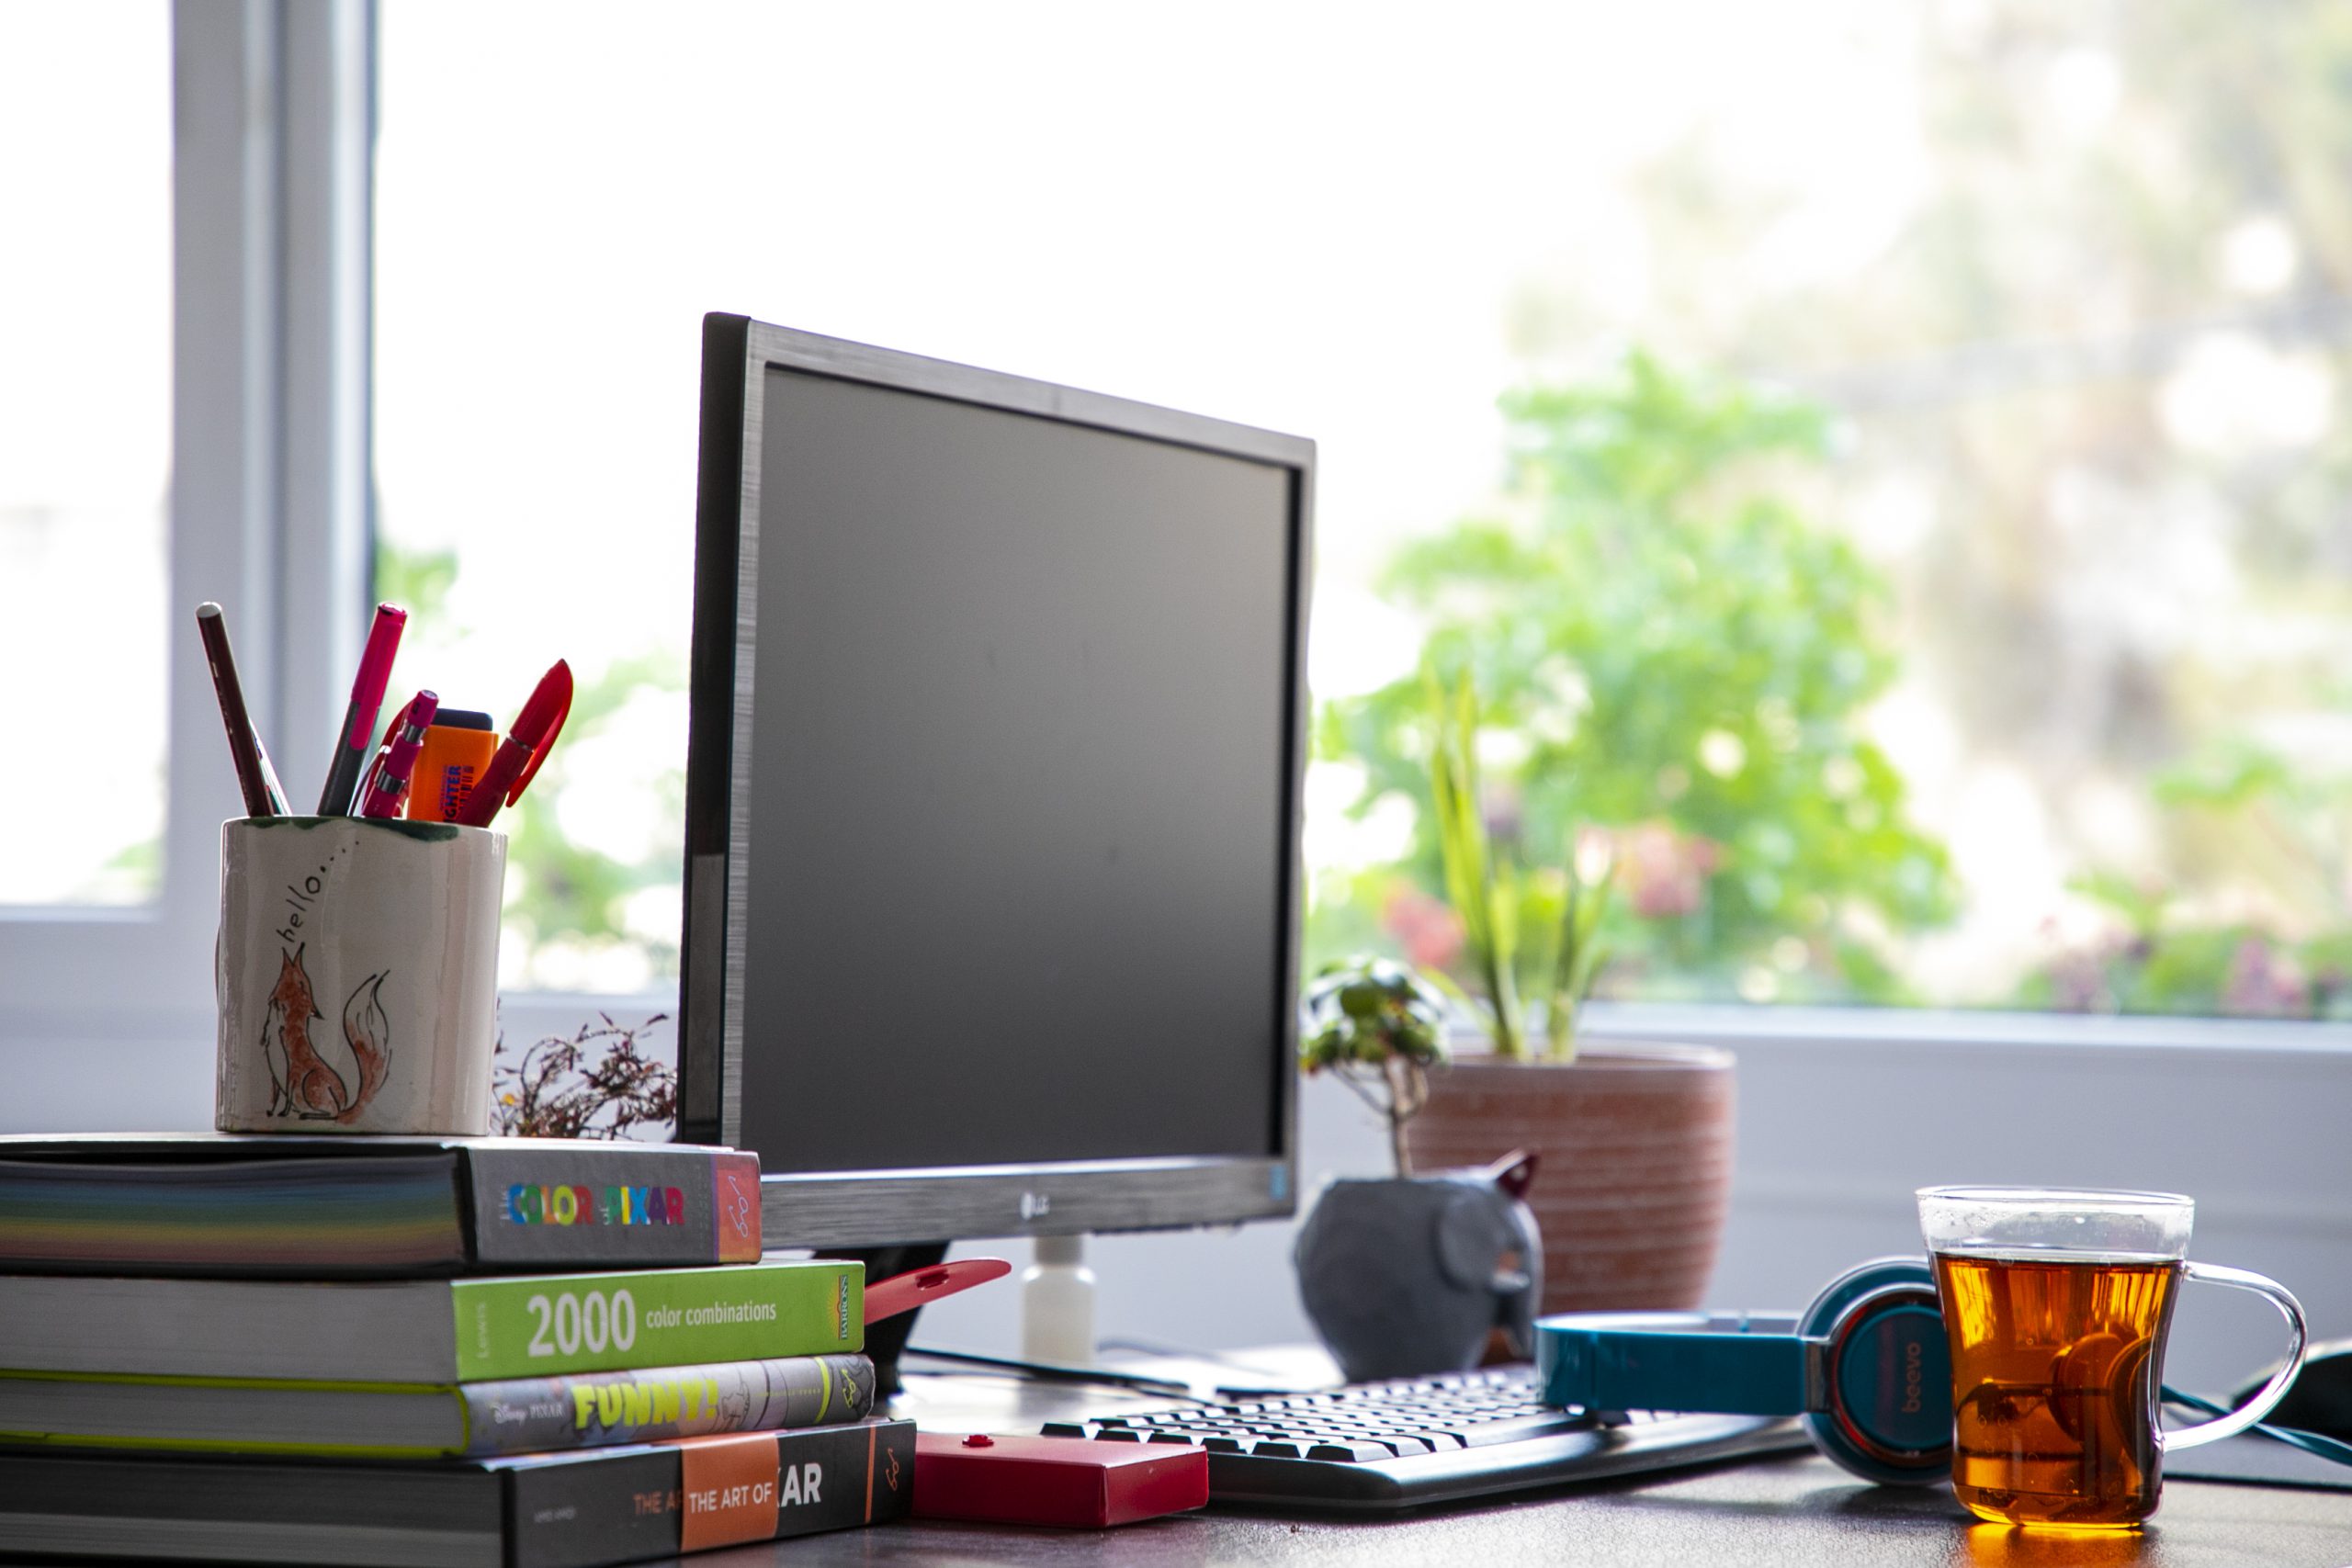 Photograph of a computer monitor, cup of tea, stack of books and potted plant sitting on a desk in front of a blurry window.